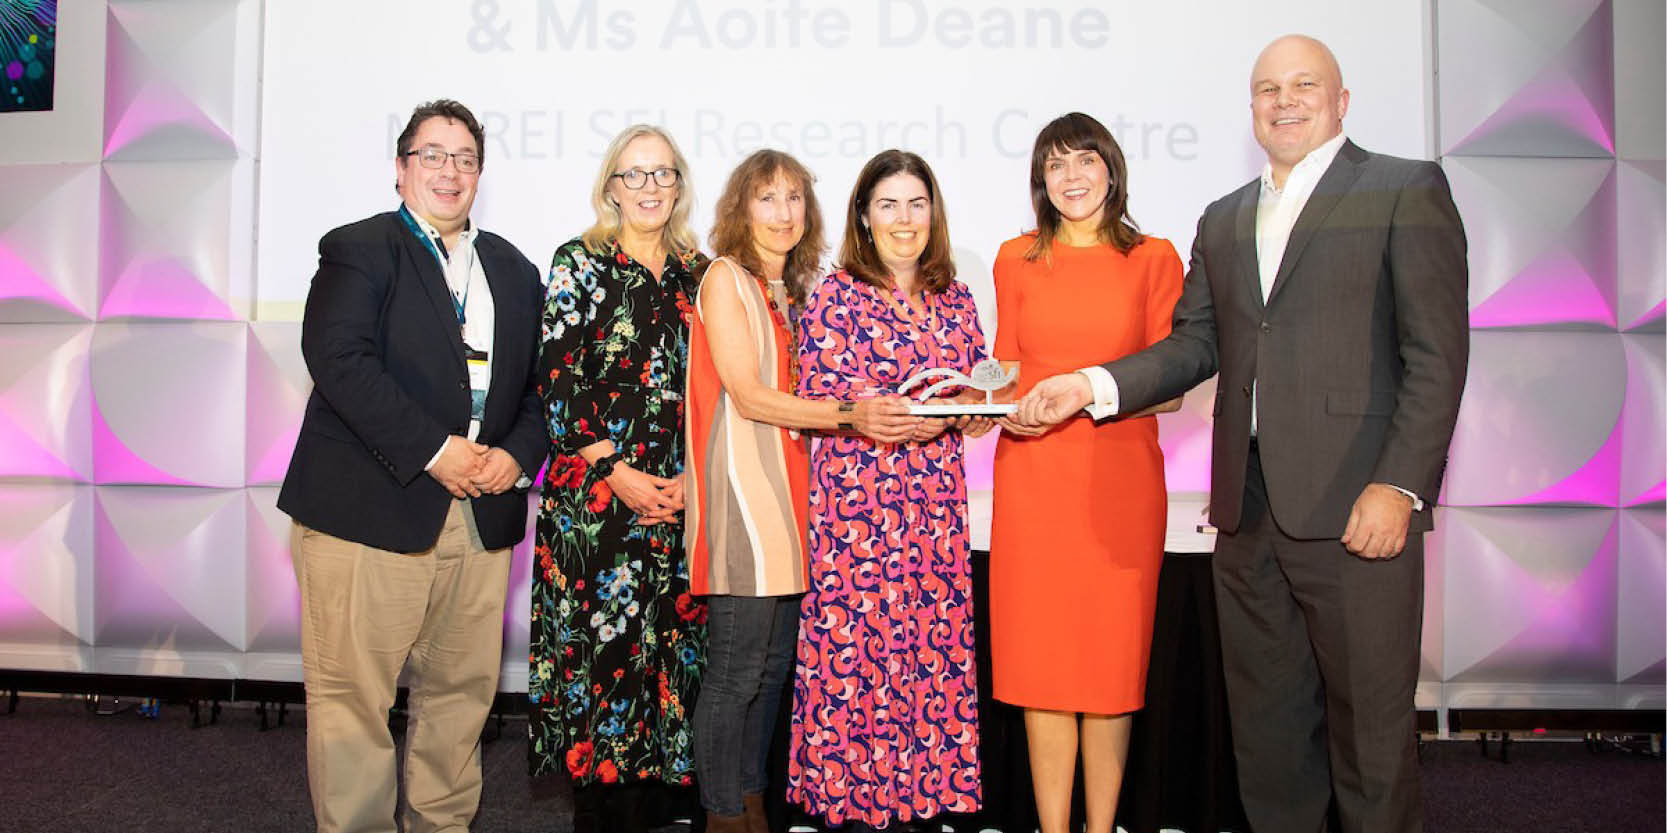 MaREI wins at the Science Foundation Ireland 2022 Awards